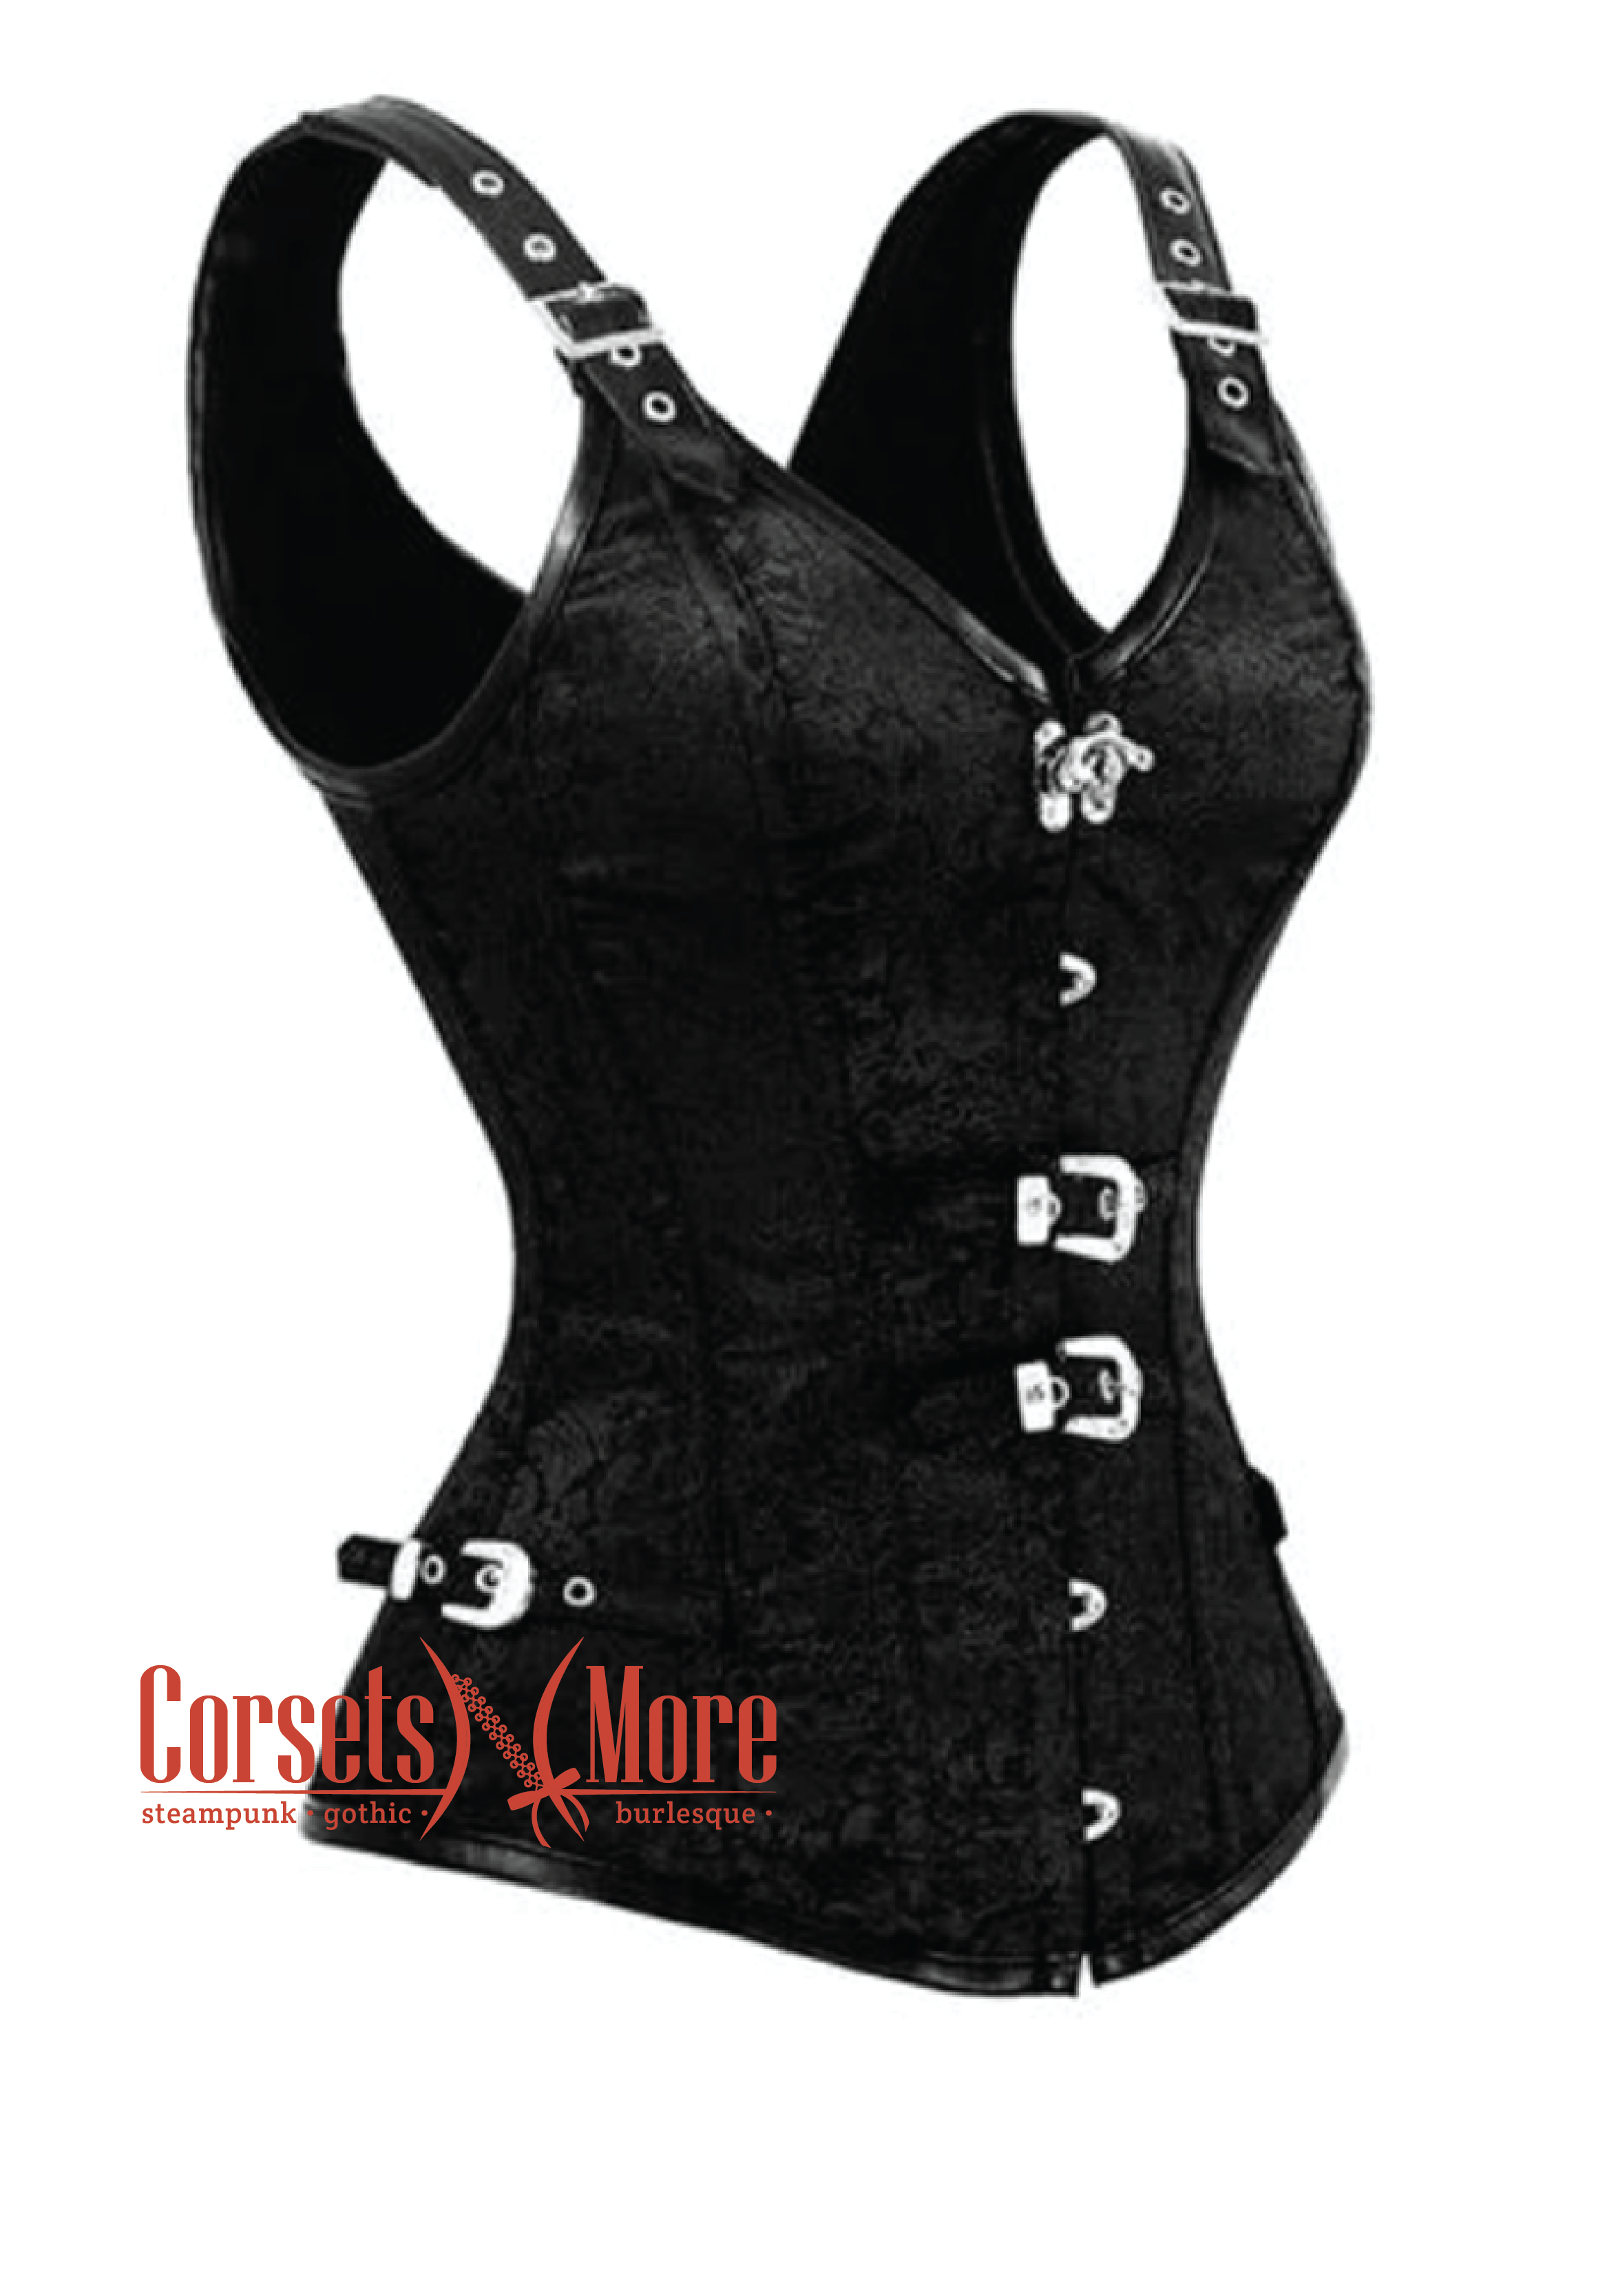 Corset Bustier Gothic Clothing Steampunk Corset Bodysuit Women Clothing  Armor Bustier With Shoulder Bolero Steel Boned Corset From My11, $58.25